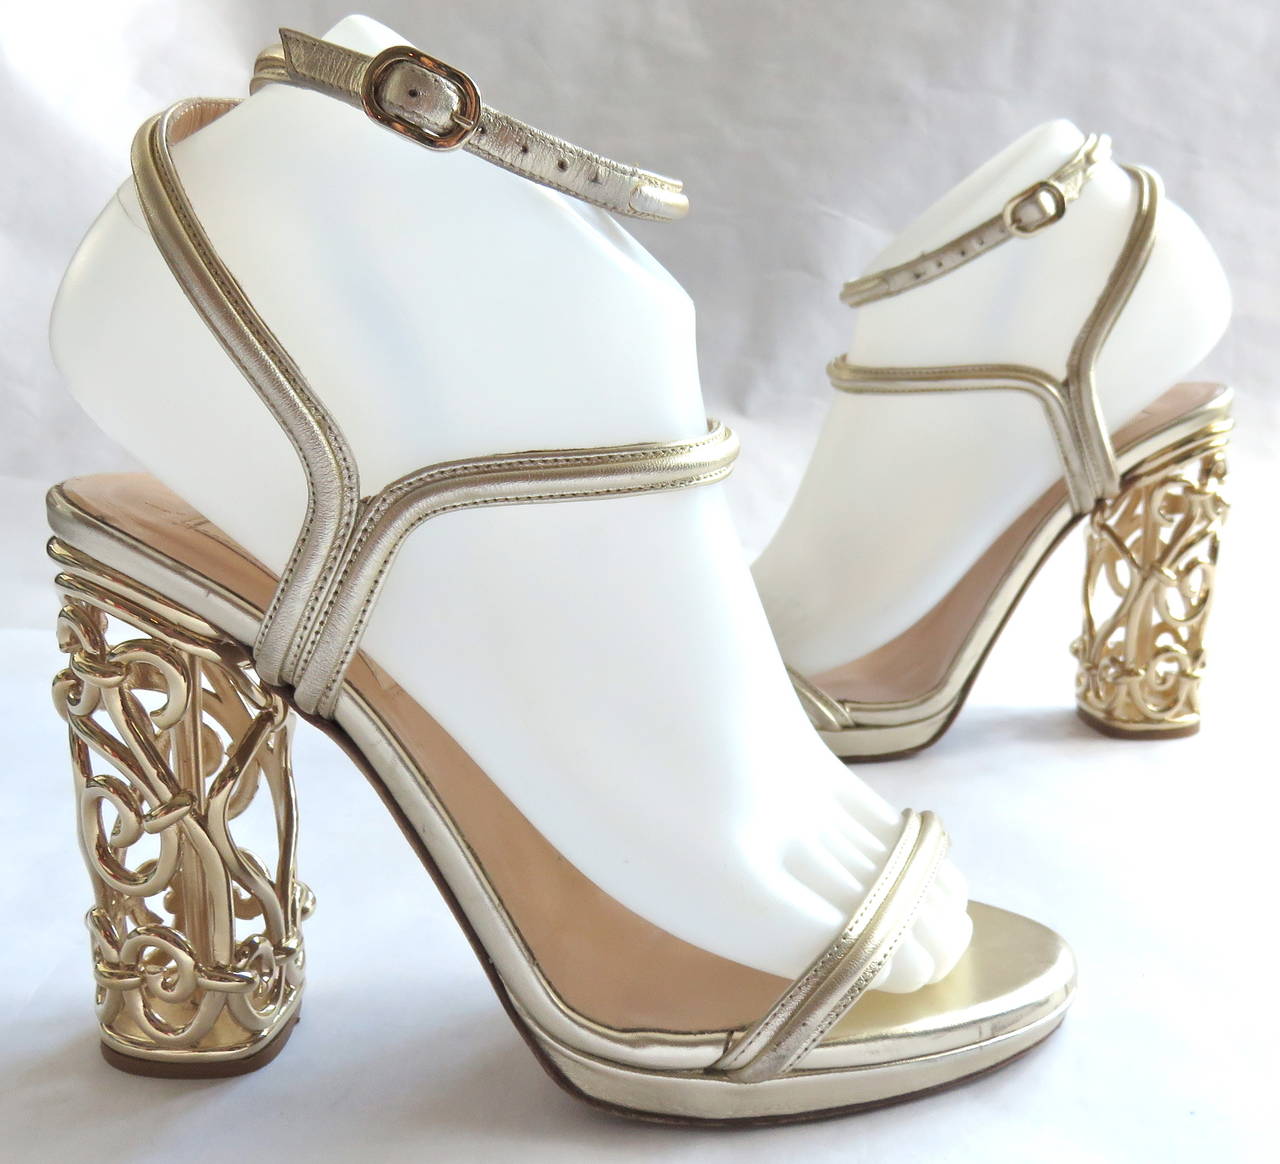 VALENTINO Metallic gold leather & metal cage heels.

Metallic gold leather straps with adjustable metal buckle at ankle.

Polished-gold, finished metal cage-style heels with cursive, spiral metal work.

The shoes are former runway/showroom